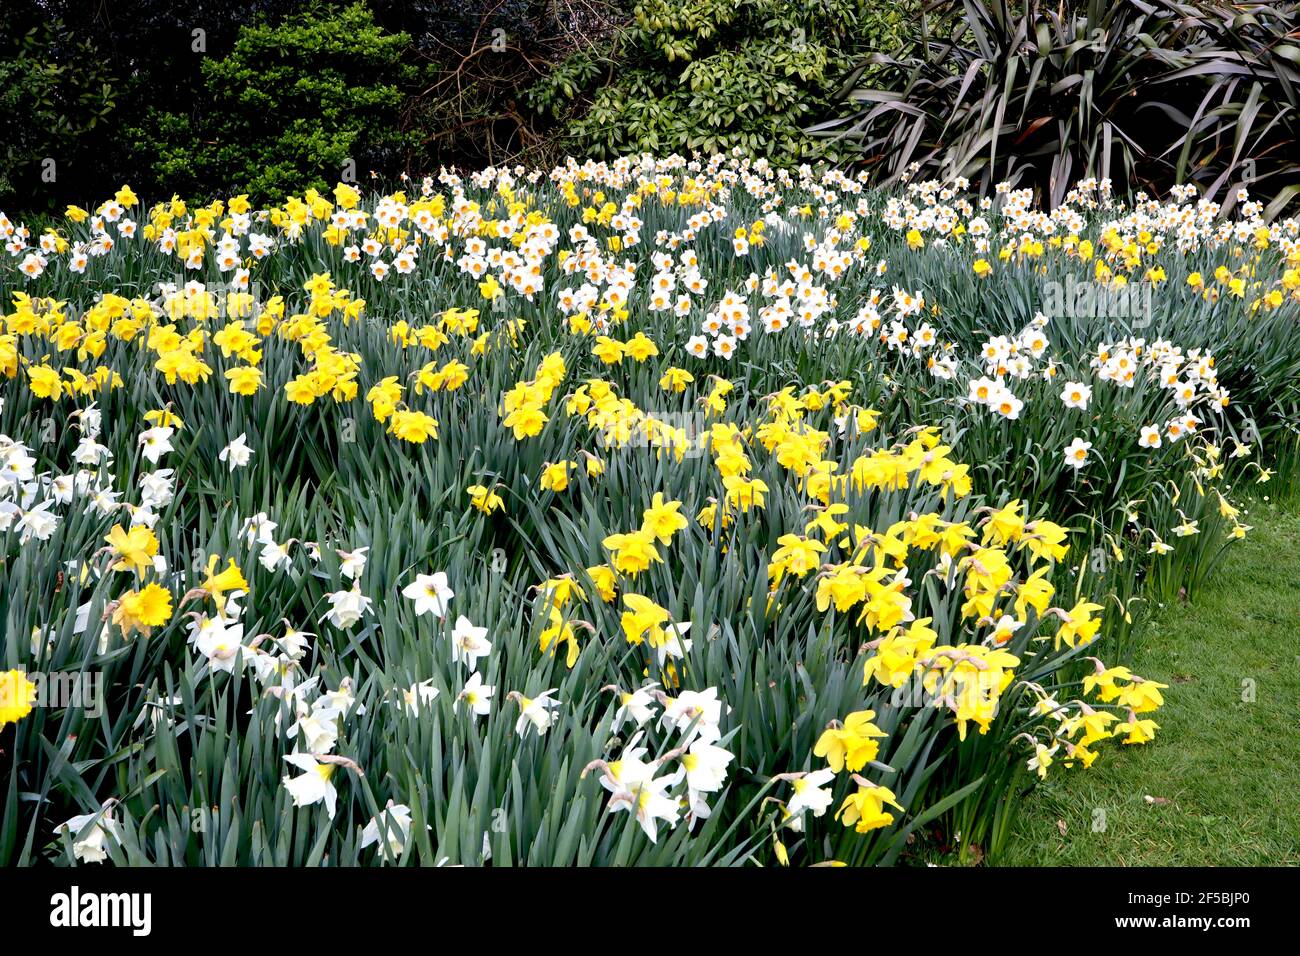 Narcissus / Daffodil 'Barrett Browning' Narcissus / Daffodil 'Dutch Master' Narcissus / Daffodil 'Mount Hood' March, Angleterre, Royaume-Uni Banque D'Images